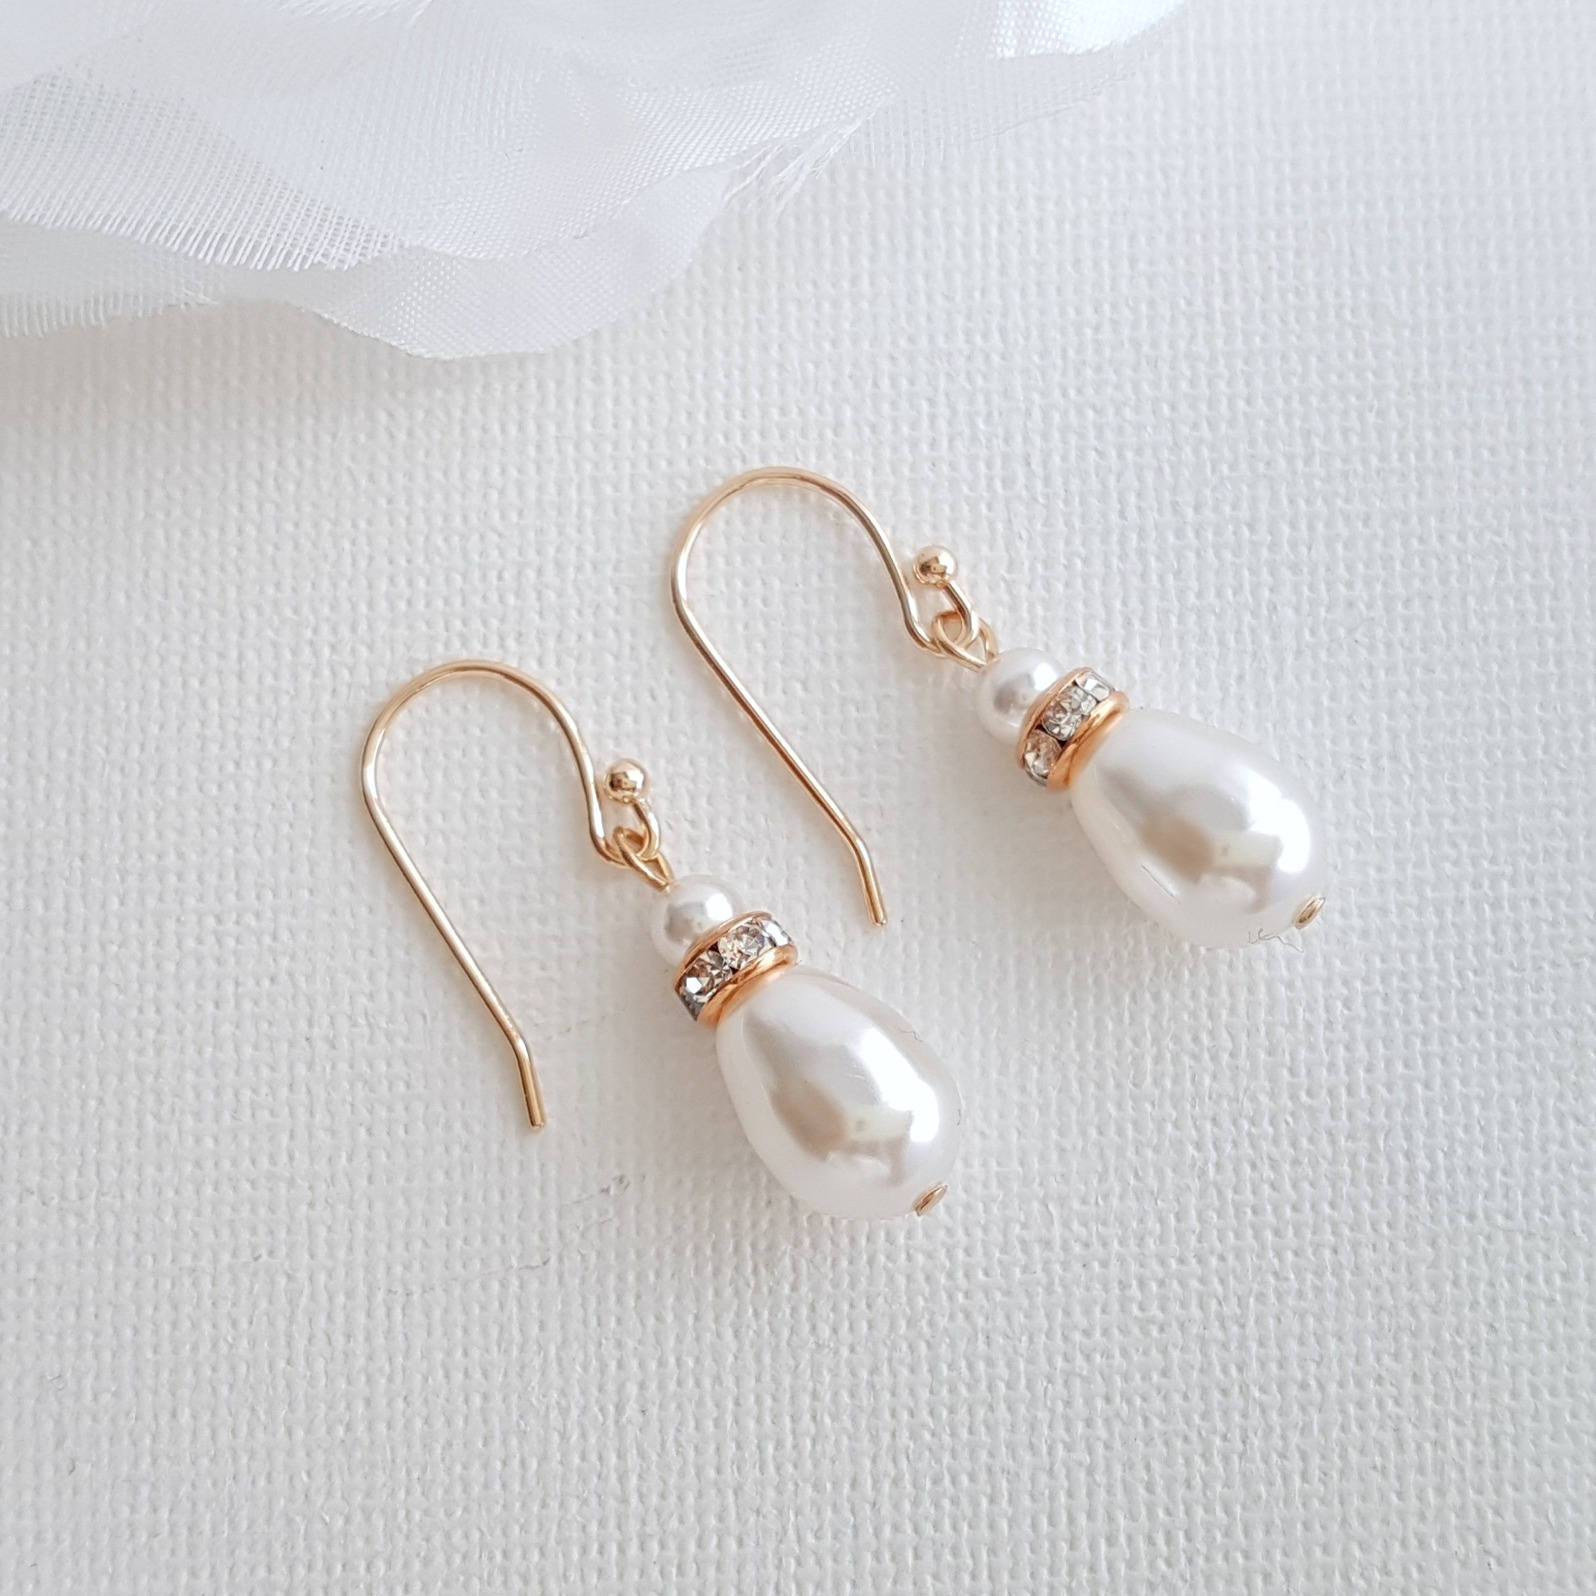 Simple Gold Earrings With Pearl Drops -June